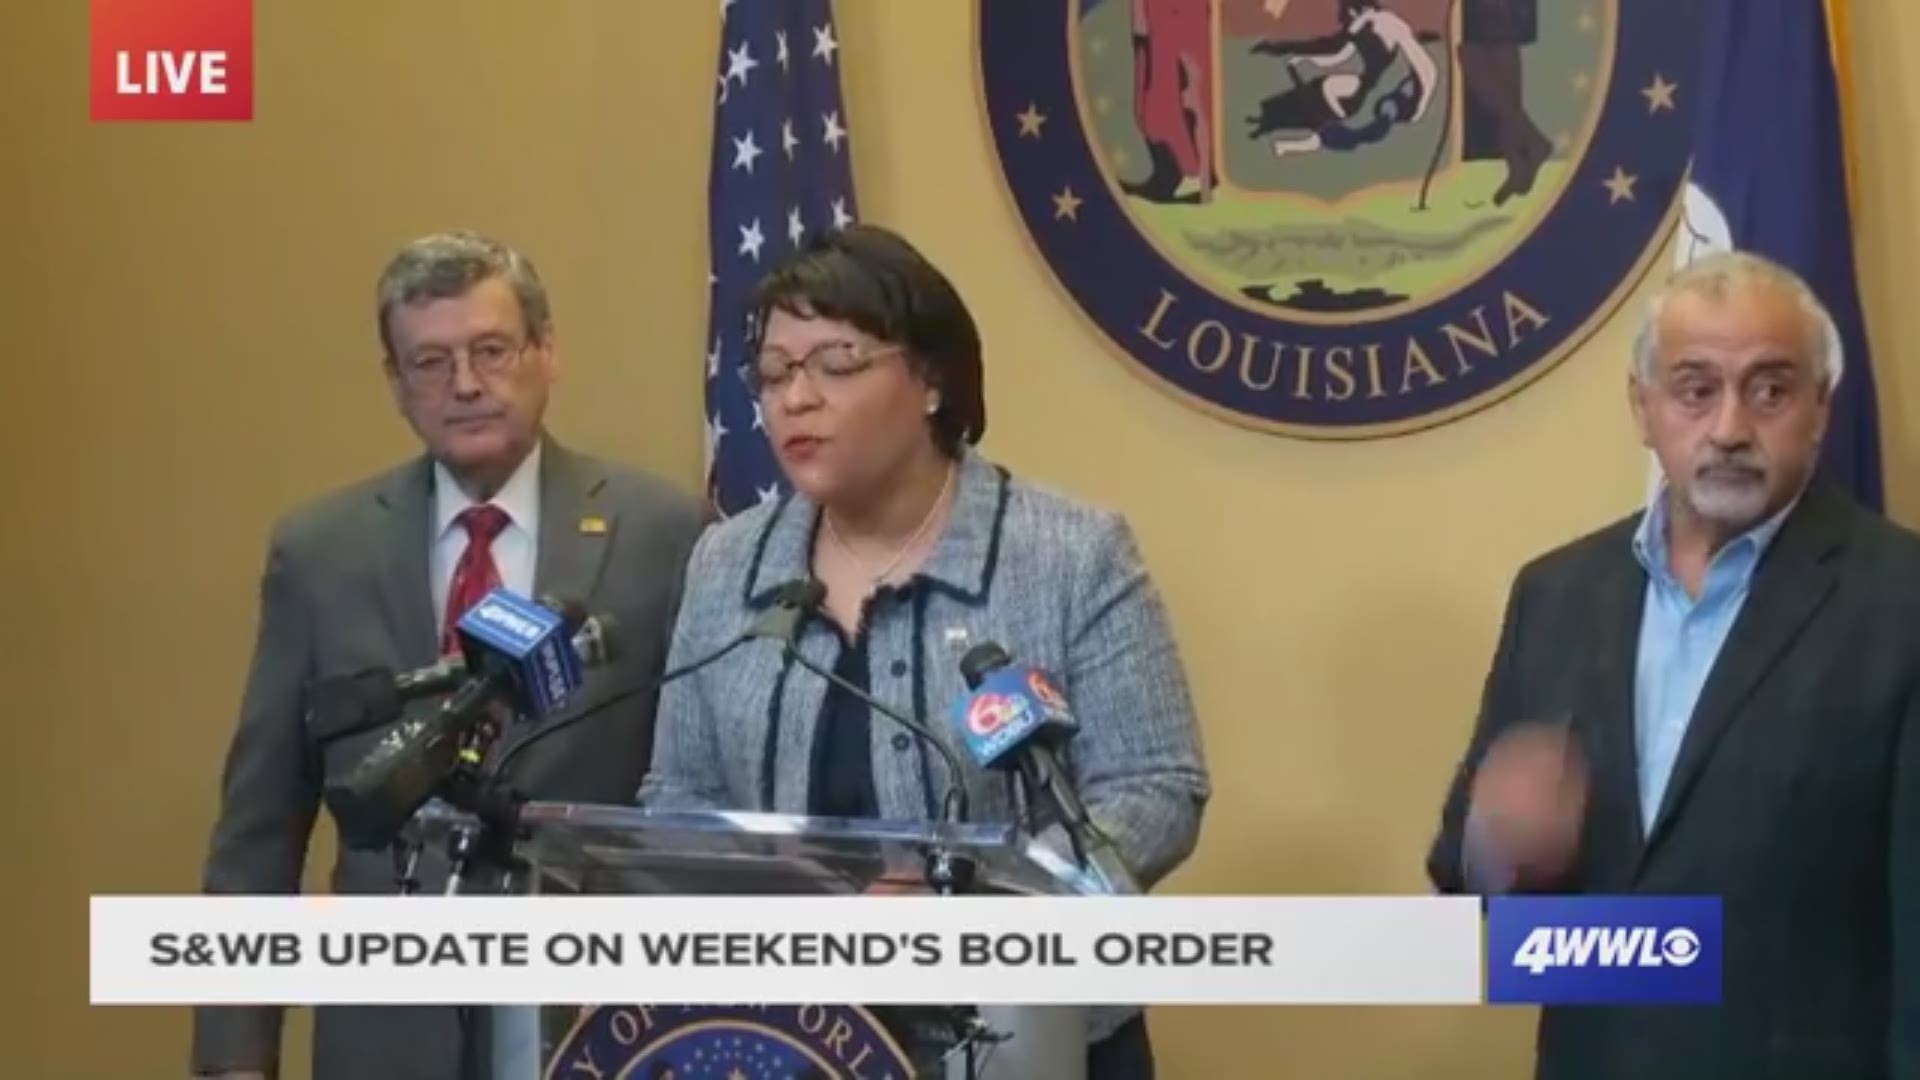 Mayor LaToya Cantrell and the Sewerage & Water Board provided new details about what caused this weekend's boil water advisory on the East Bank of New Orleans.